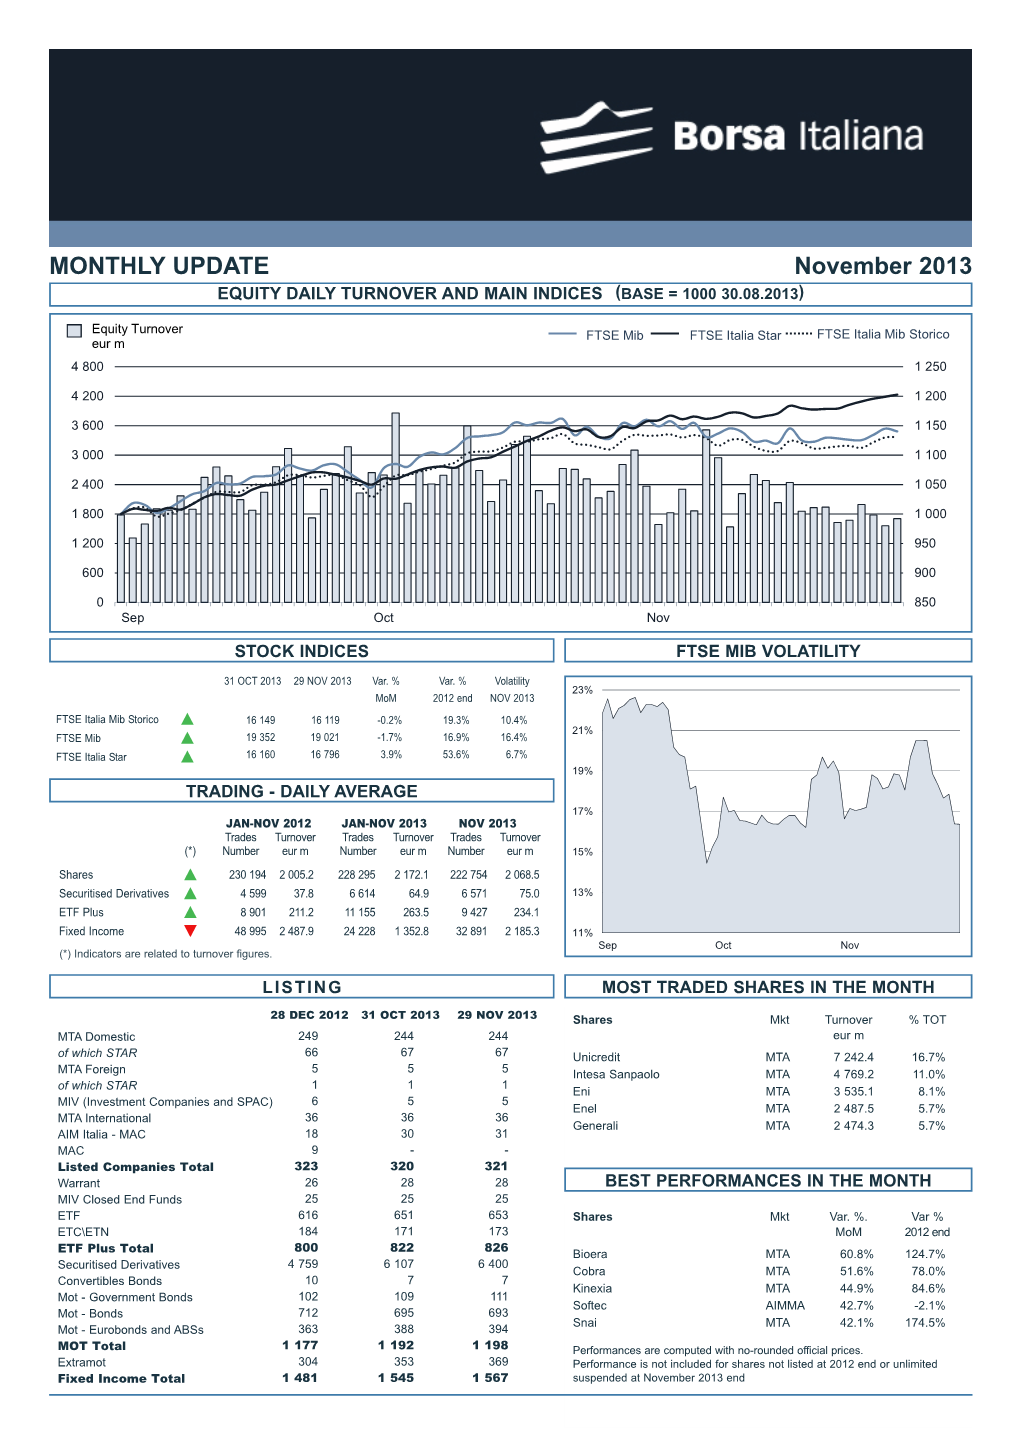 MONTHLY UPDATE November 2013 EQUITY DAILY TURNOVER and MAIN INDICES (BASE = 1000 30.08.2013)